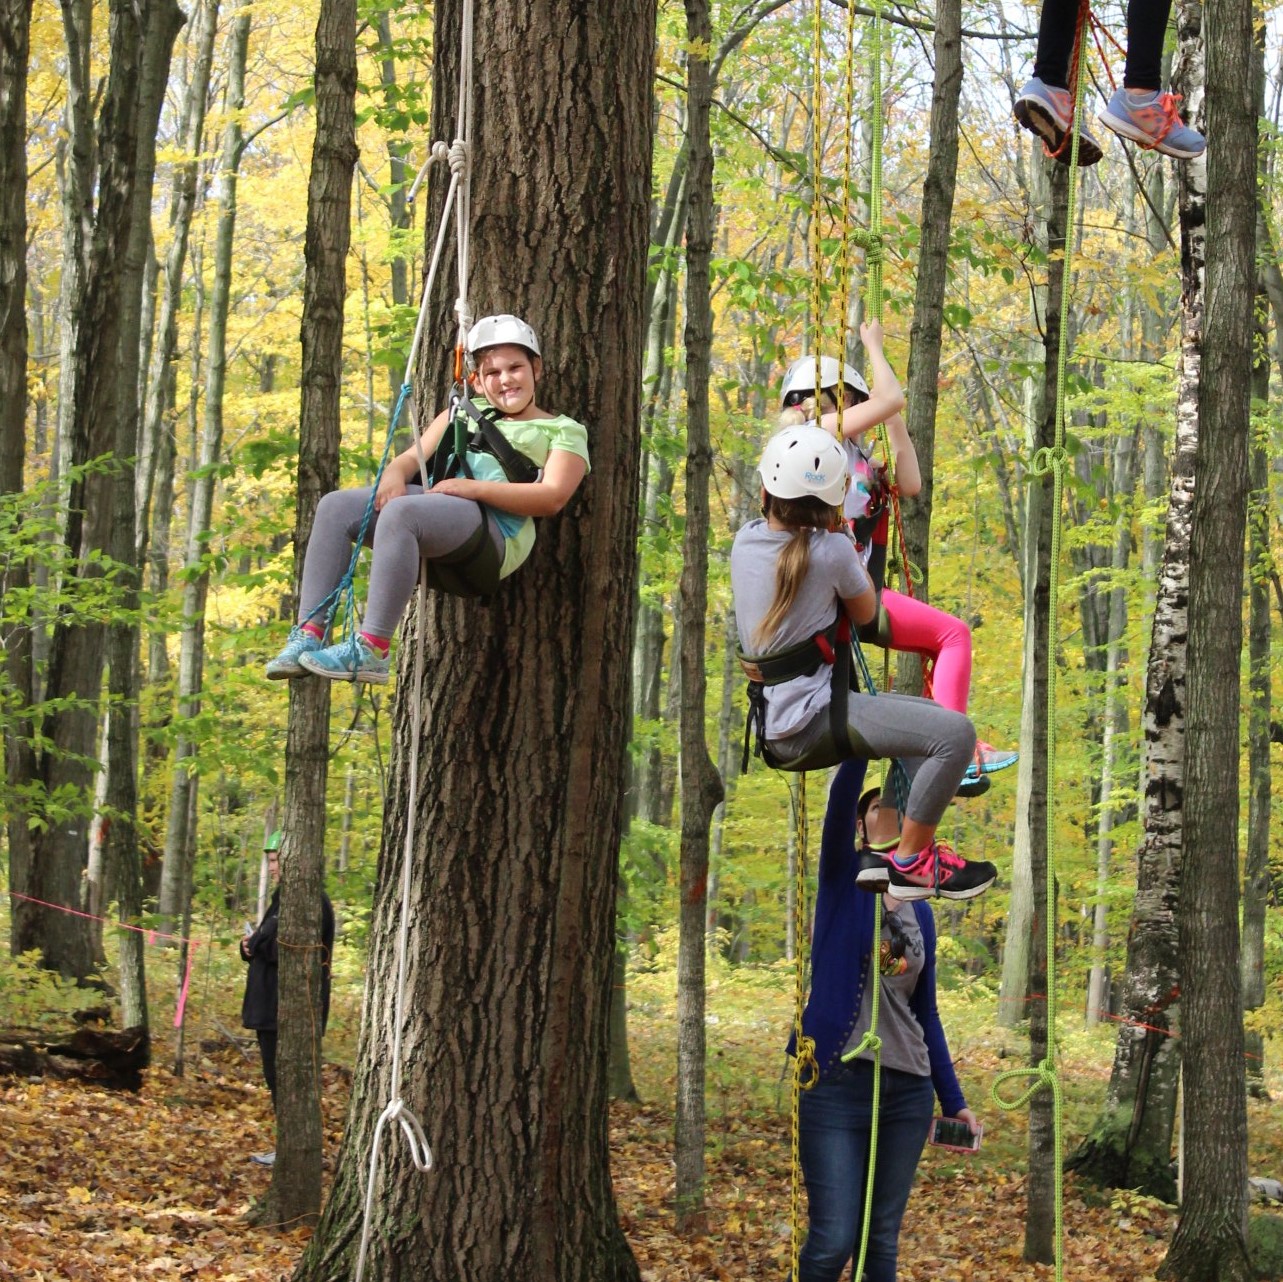 3 kids hang from ropes in a tree in the Riveredge forest